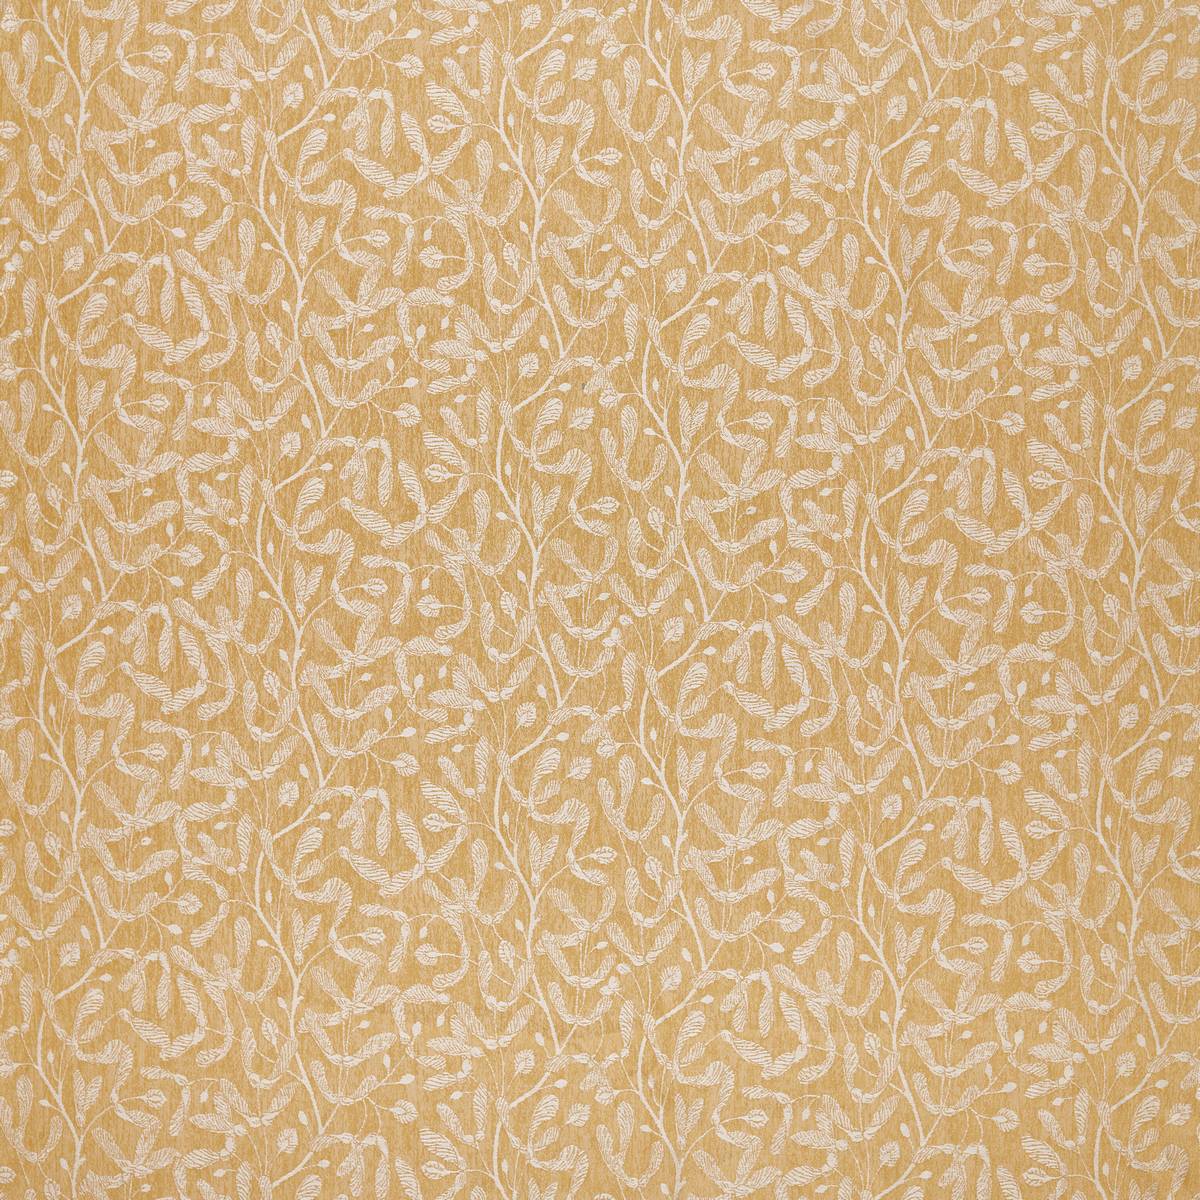 Trailing Sycamore Weave Ochre Fabric by Sanderson